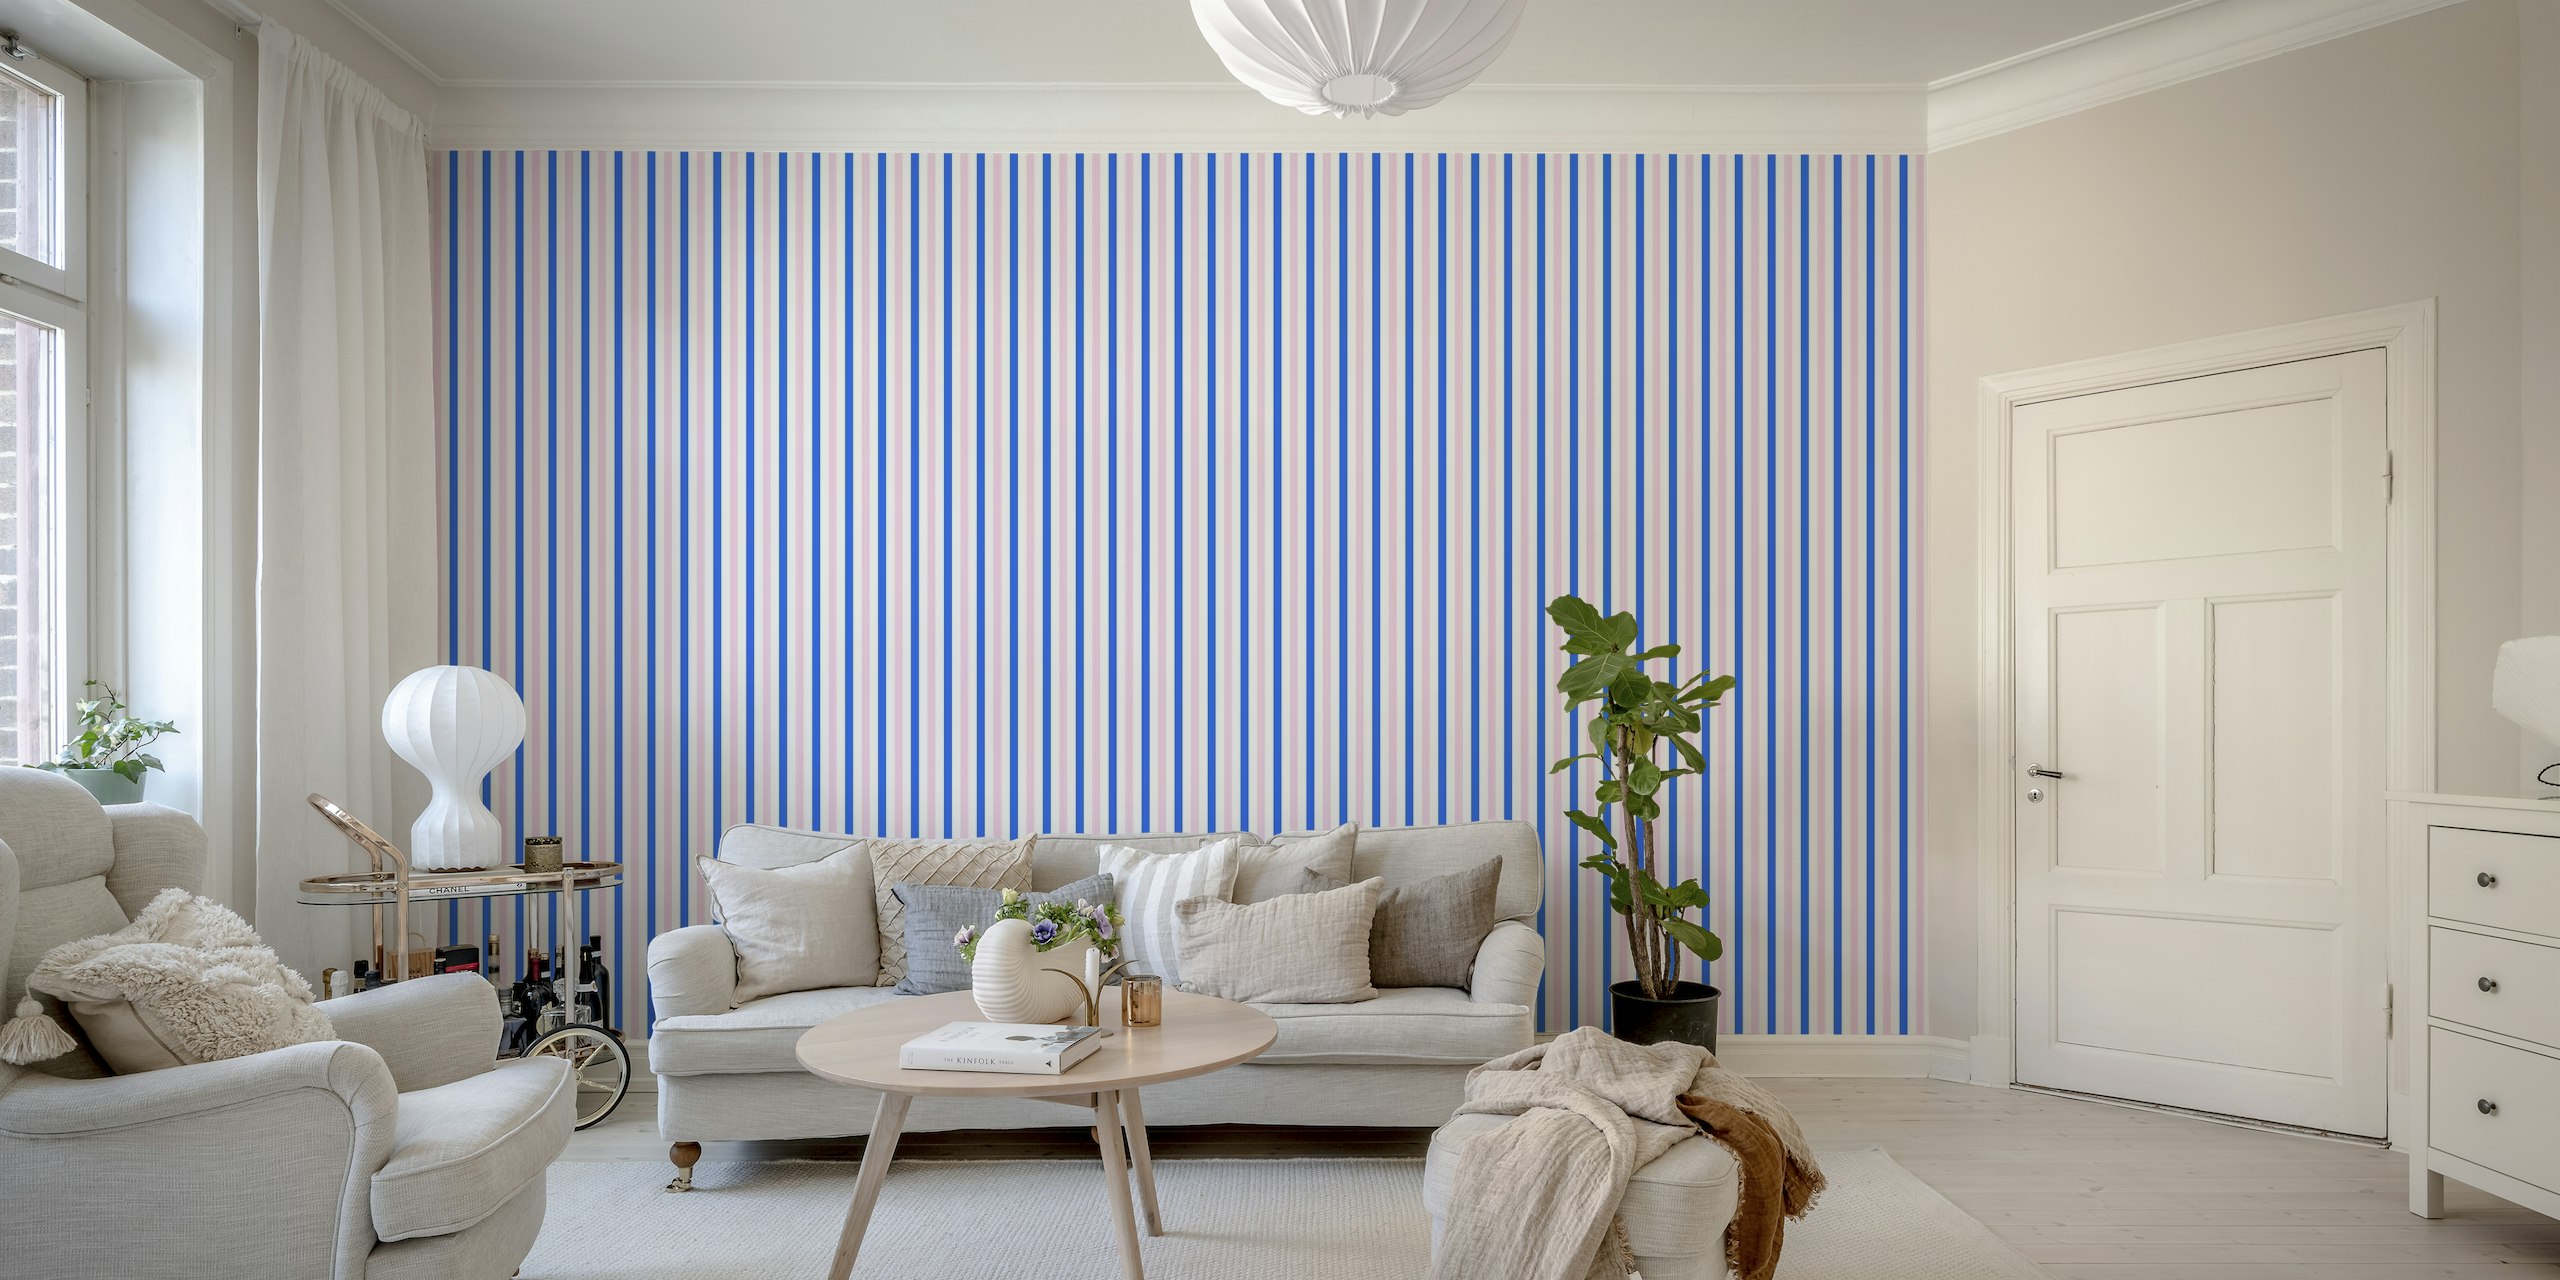 Blue and pink vertical stripes papel pintado